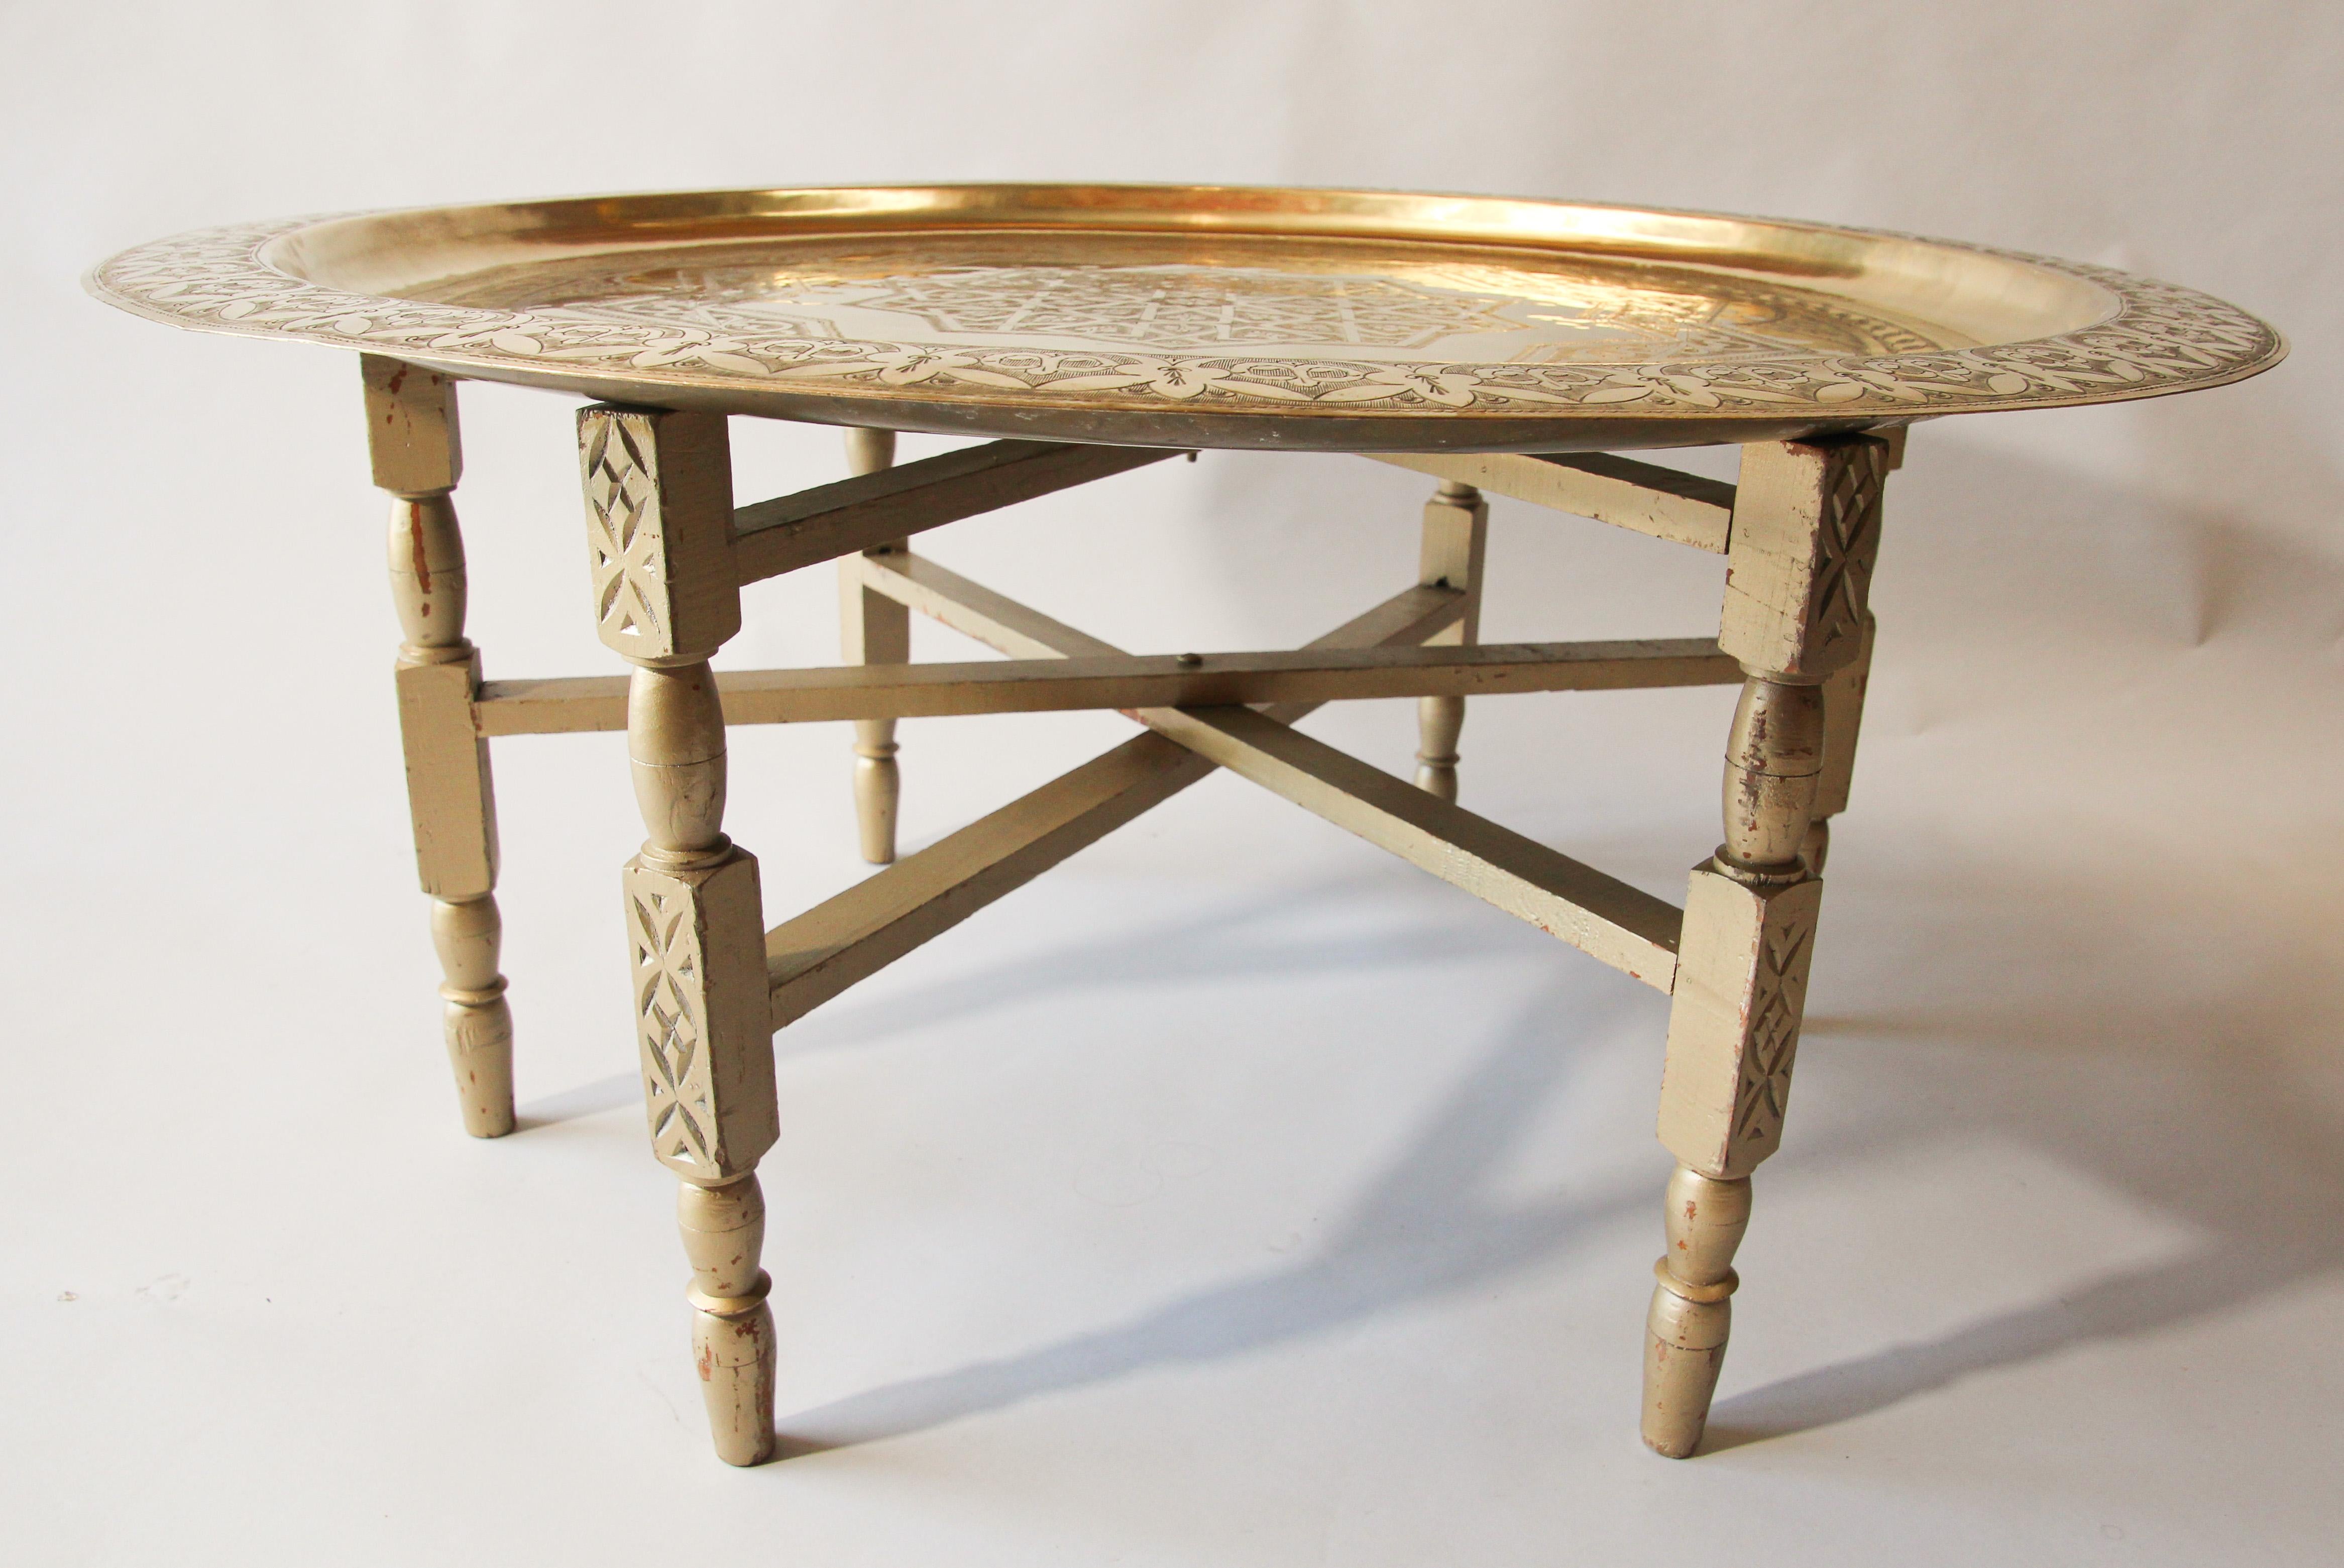 Hammered Moroccan Large Polished Brass Tray Table on Folding Stand 40 in.Diameter